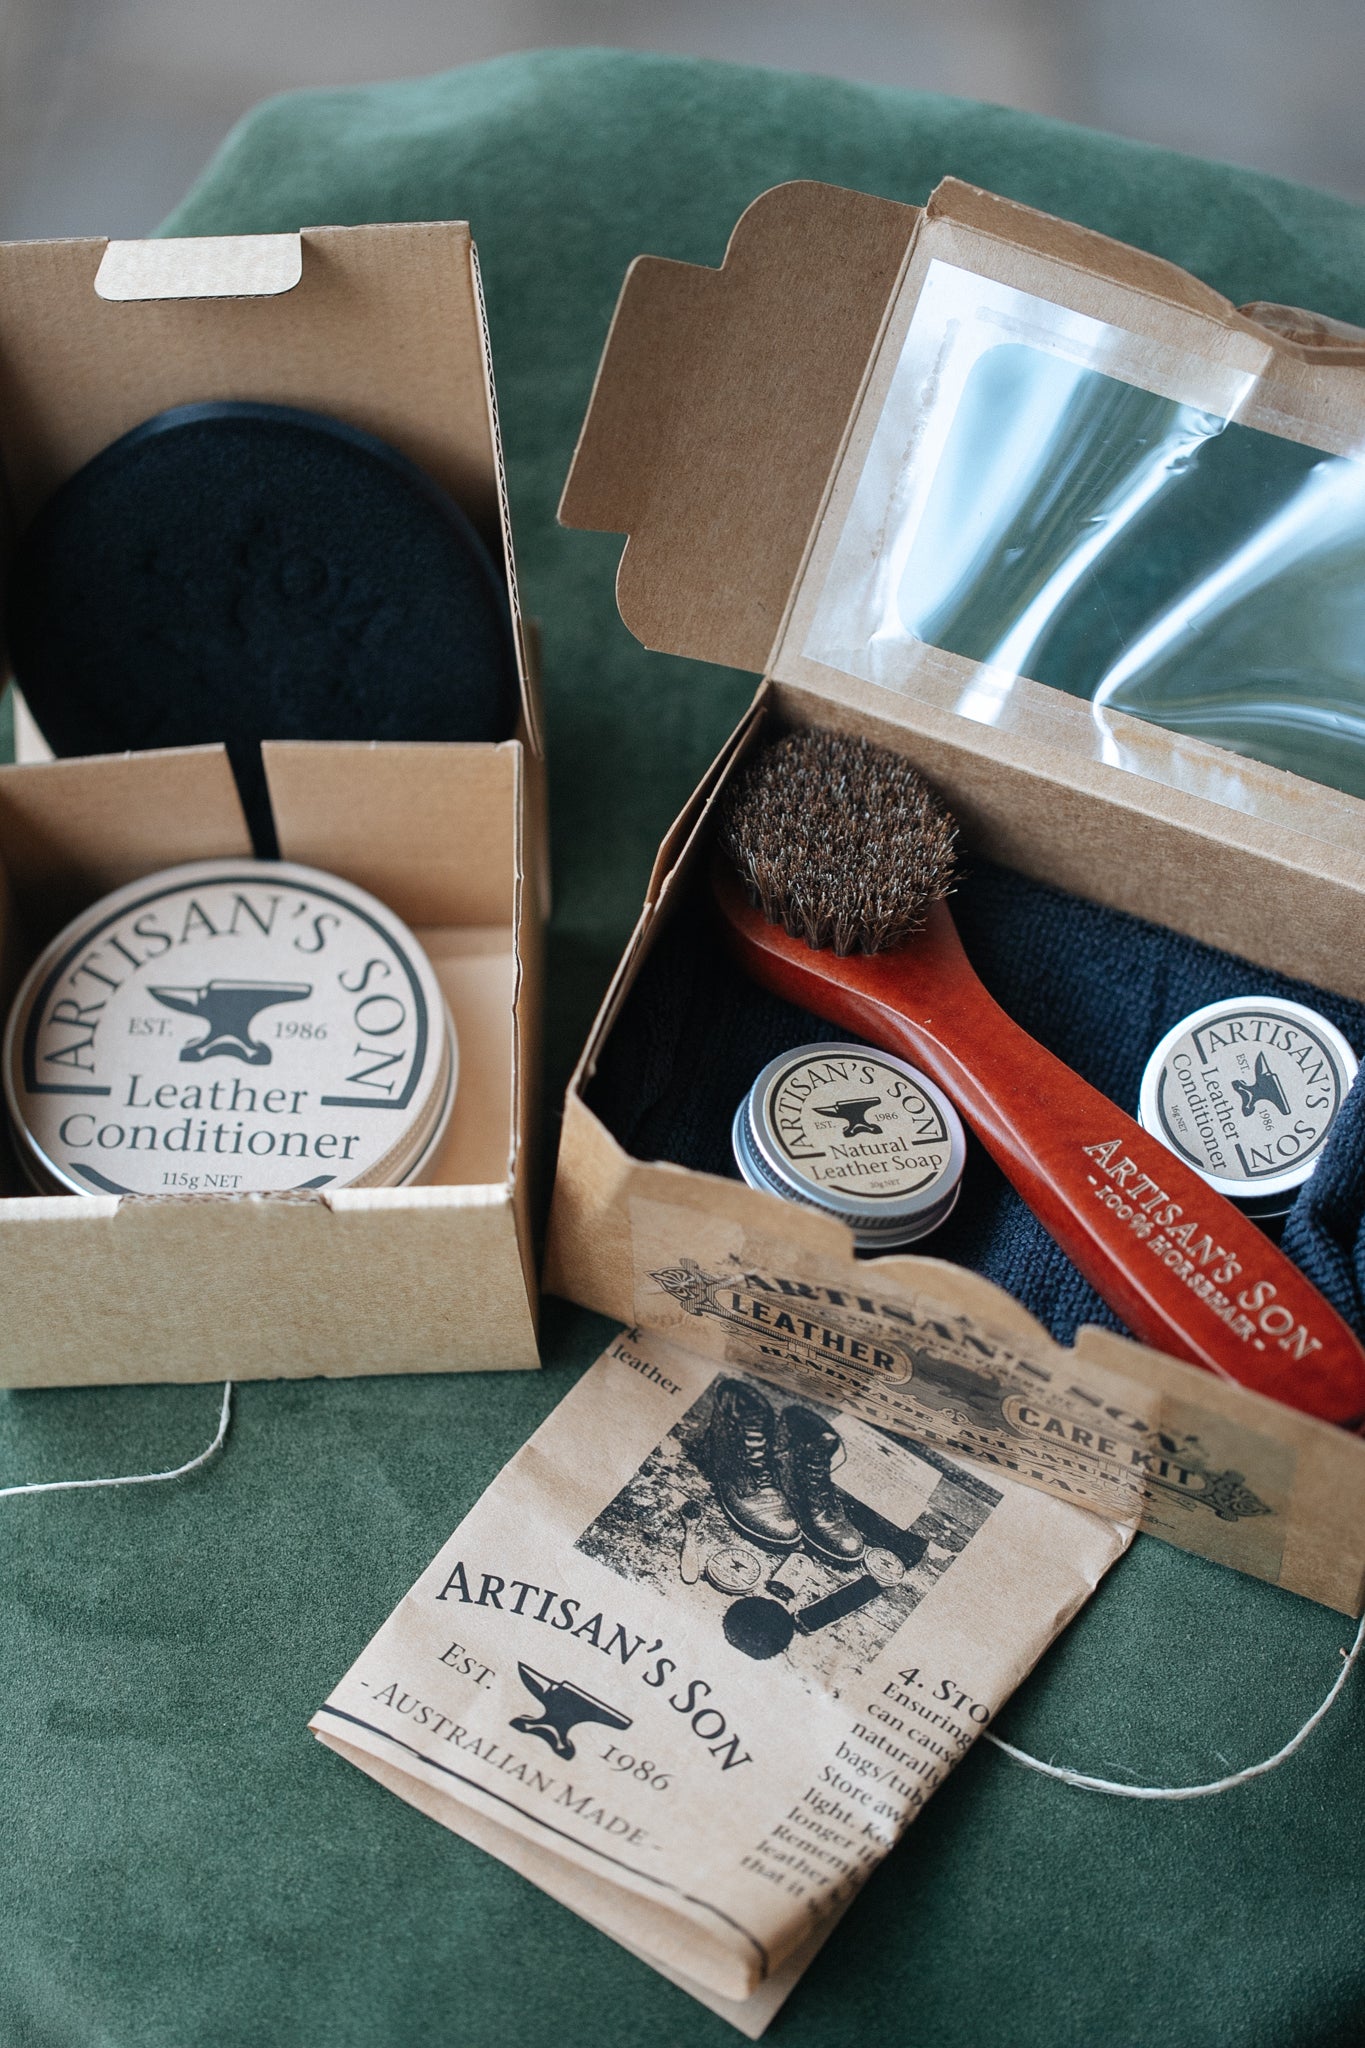 Leather Care Products